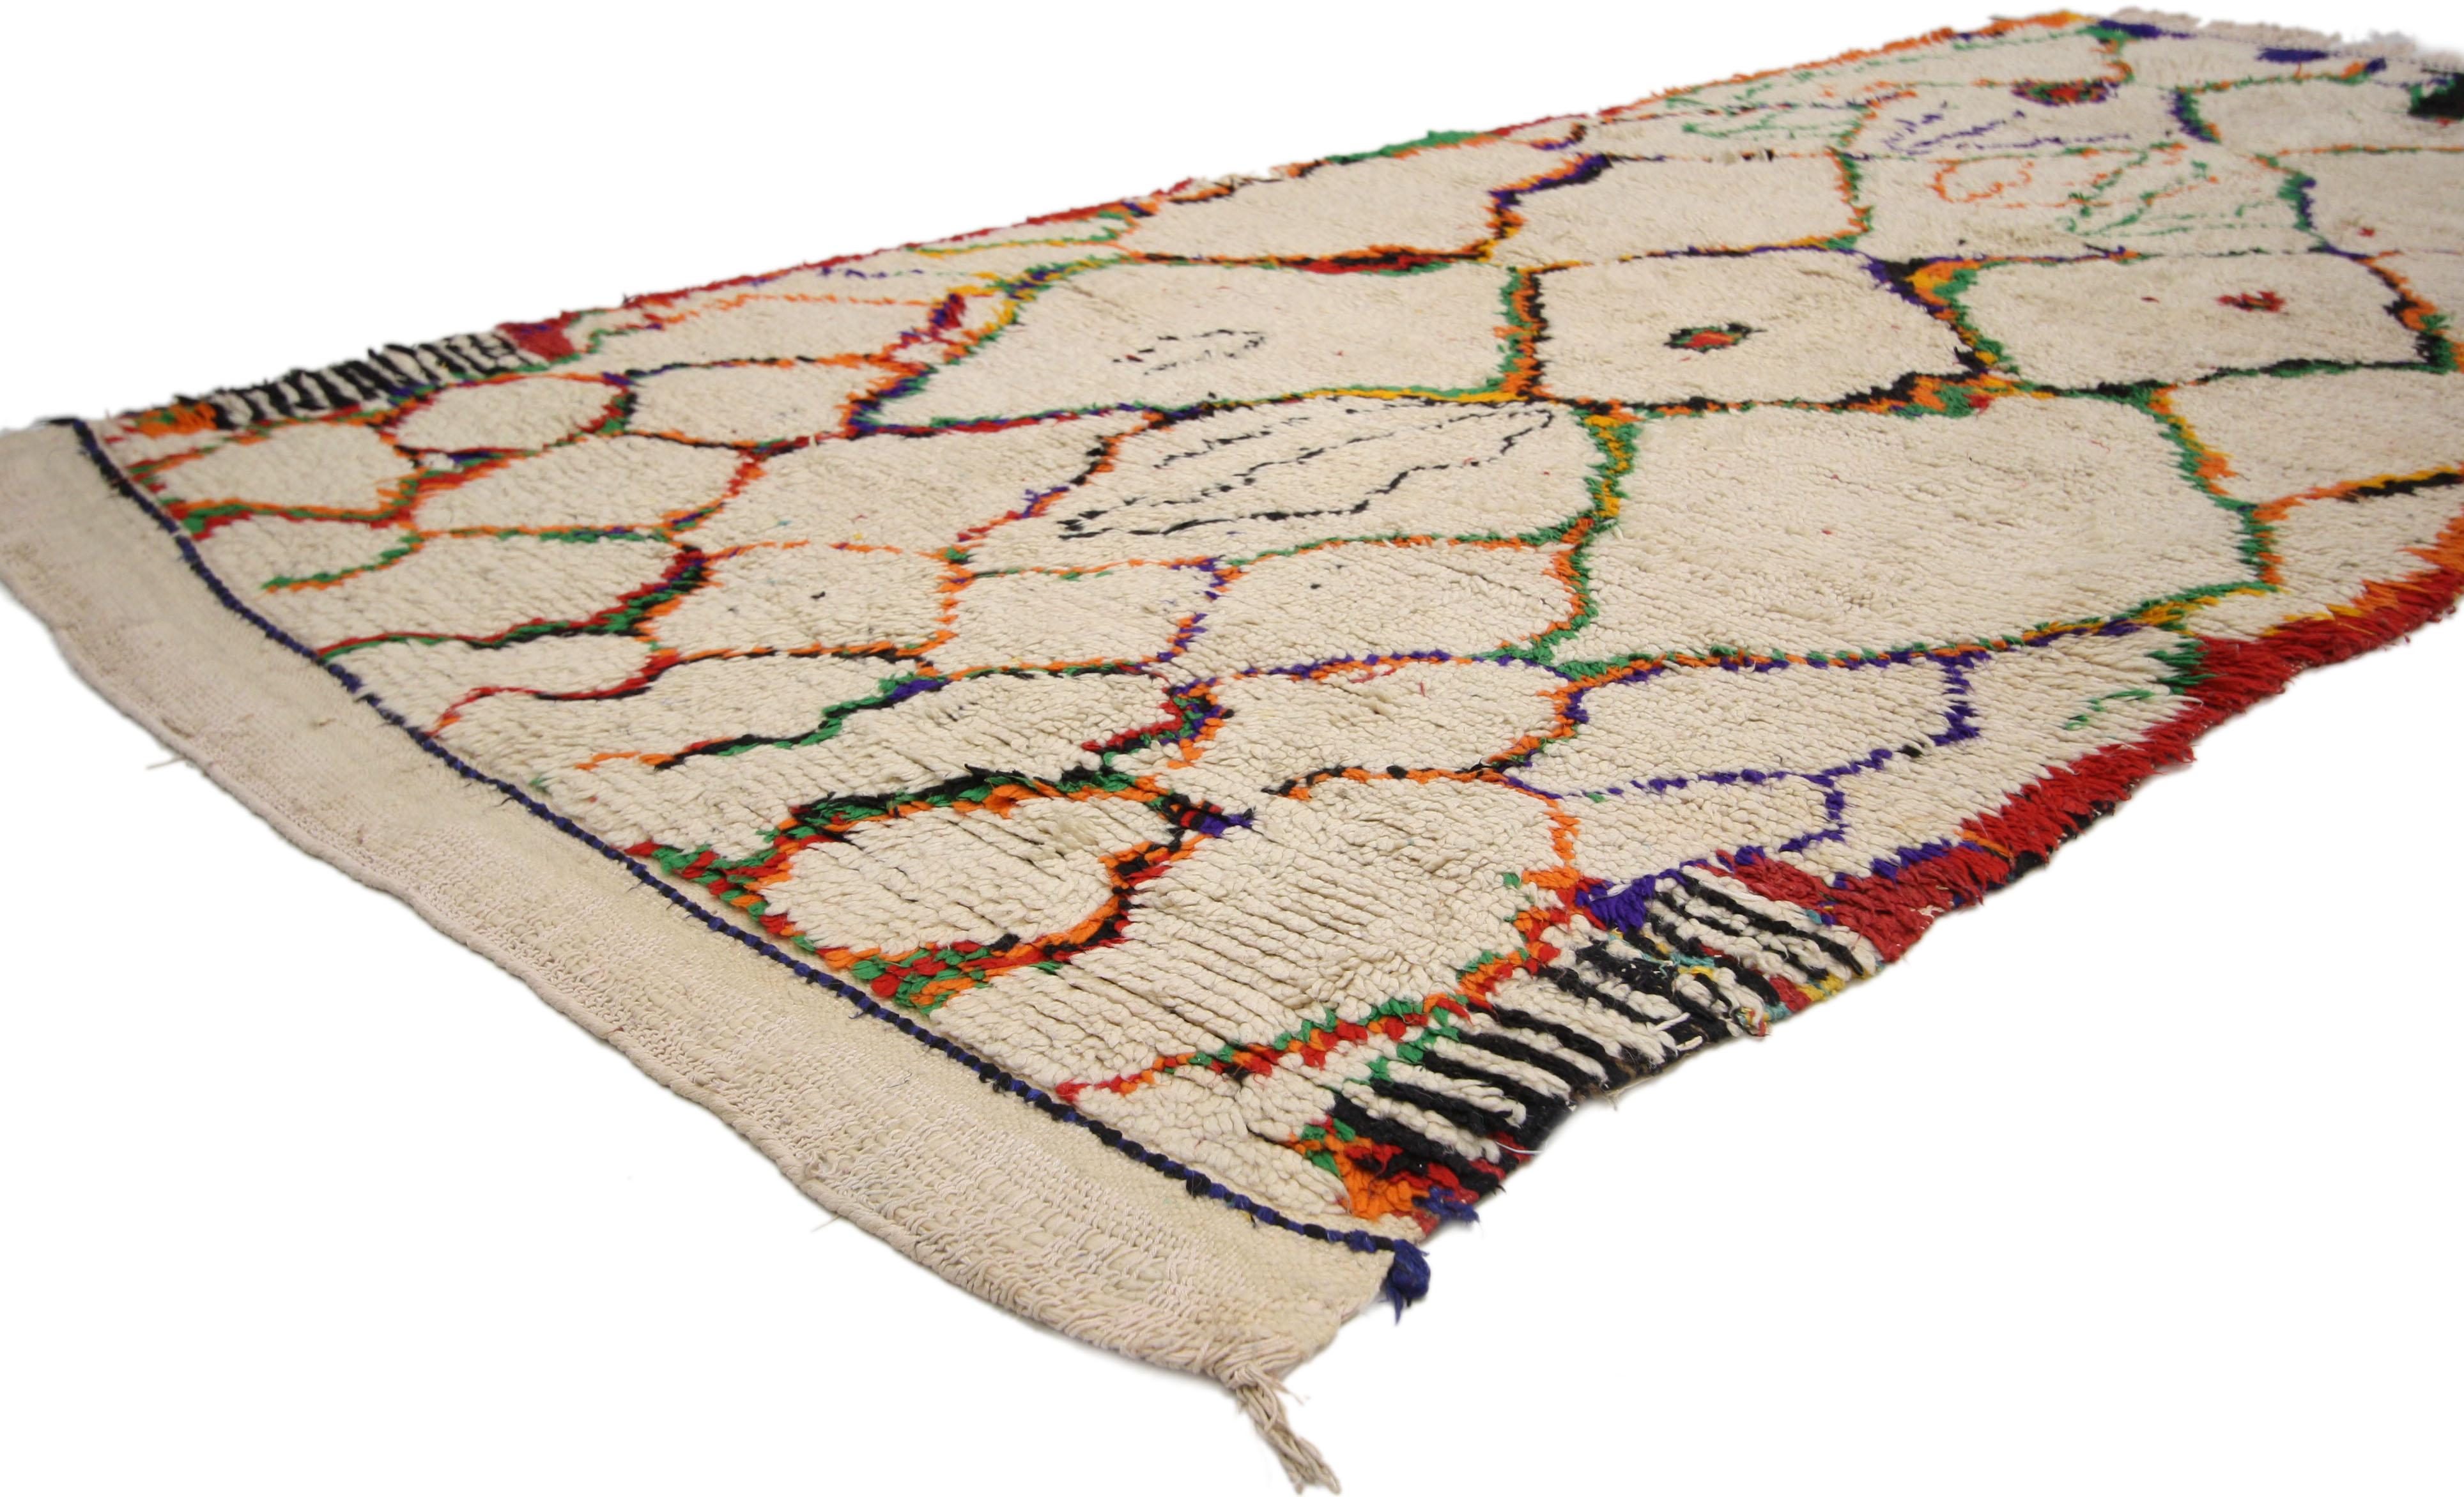 74823 Contemporary Berber Moroccan Azilal runner with Postmodern Memphis style, Shag Hallway runner. Admired for it's vibrant colors and whimsical nomadic vibes, this Moroccan Azilal runner displays Postmodern style and Memphis Design. This hand